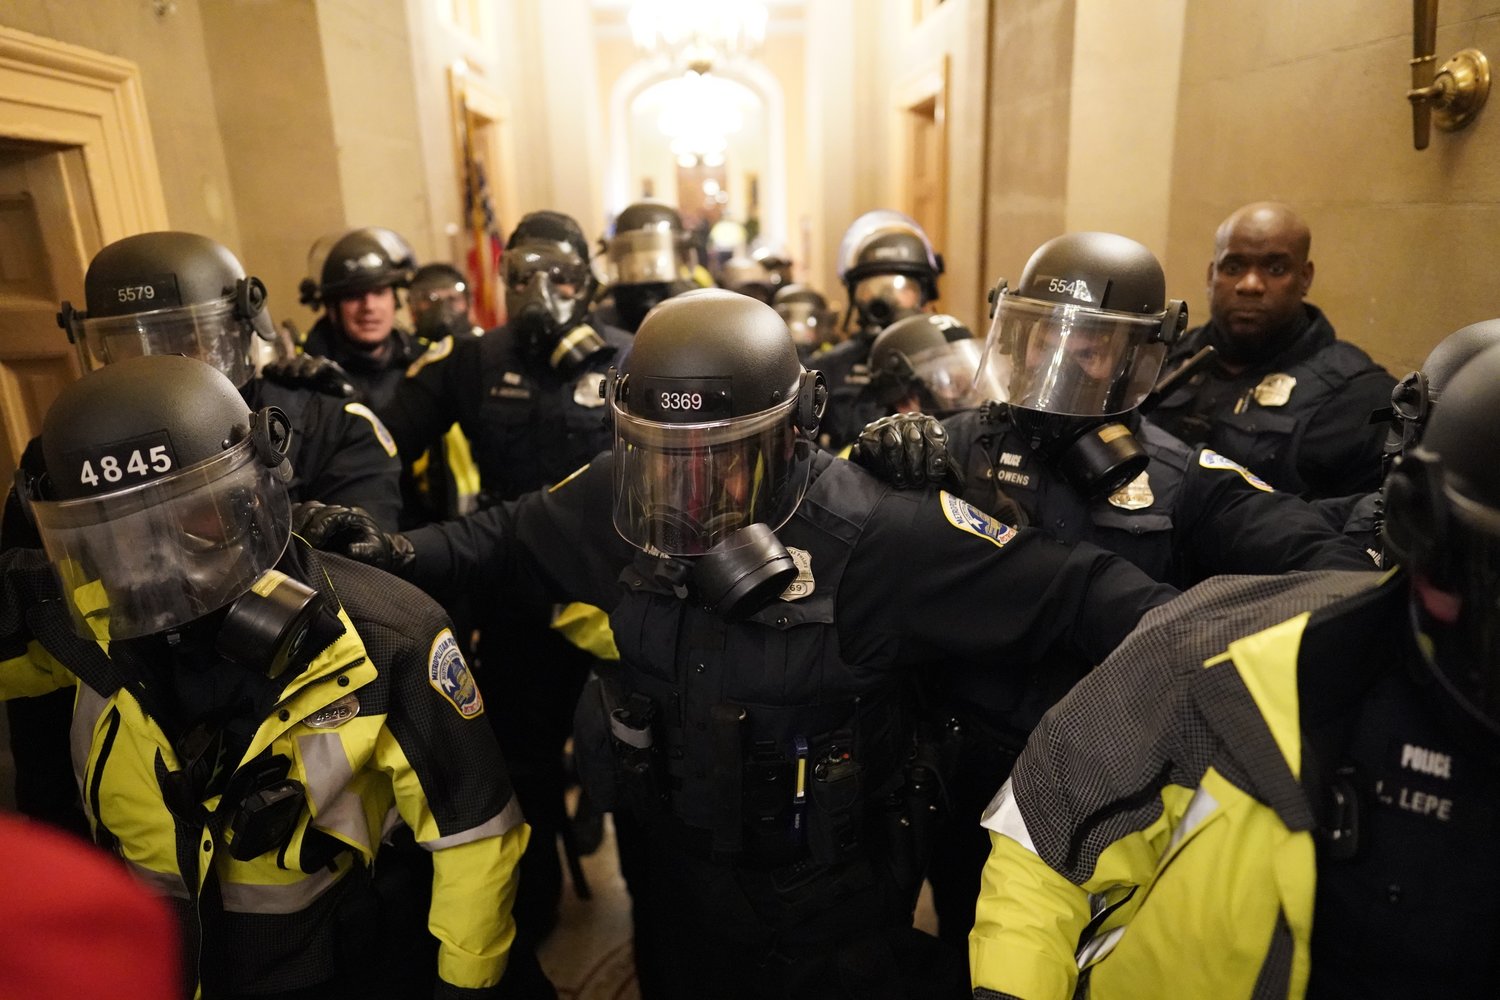 Riot police clear the hallway inside the Capitol on Wednesday, Jan. 6, 2021, in Washington, D.C. (Kent Nishimura/Los Angeles Times/TNS)